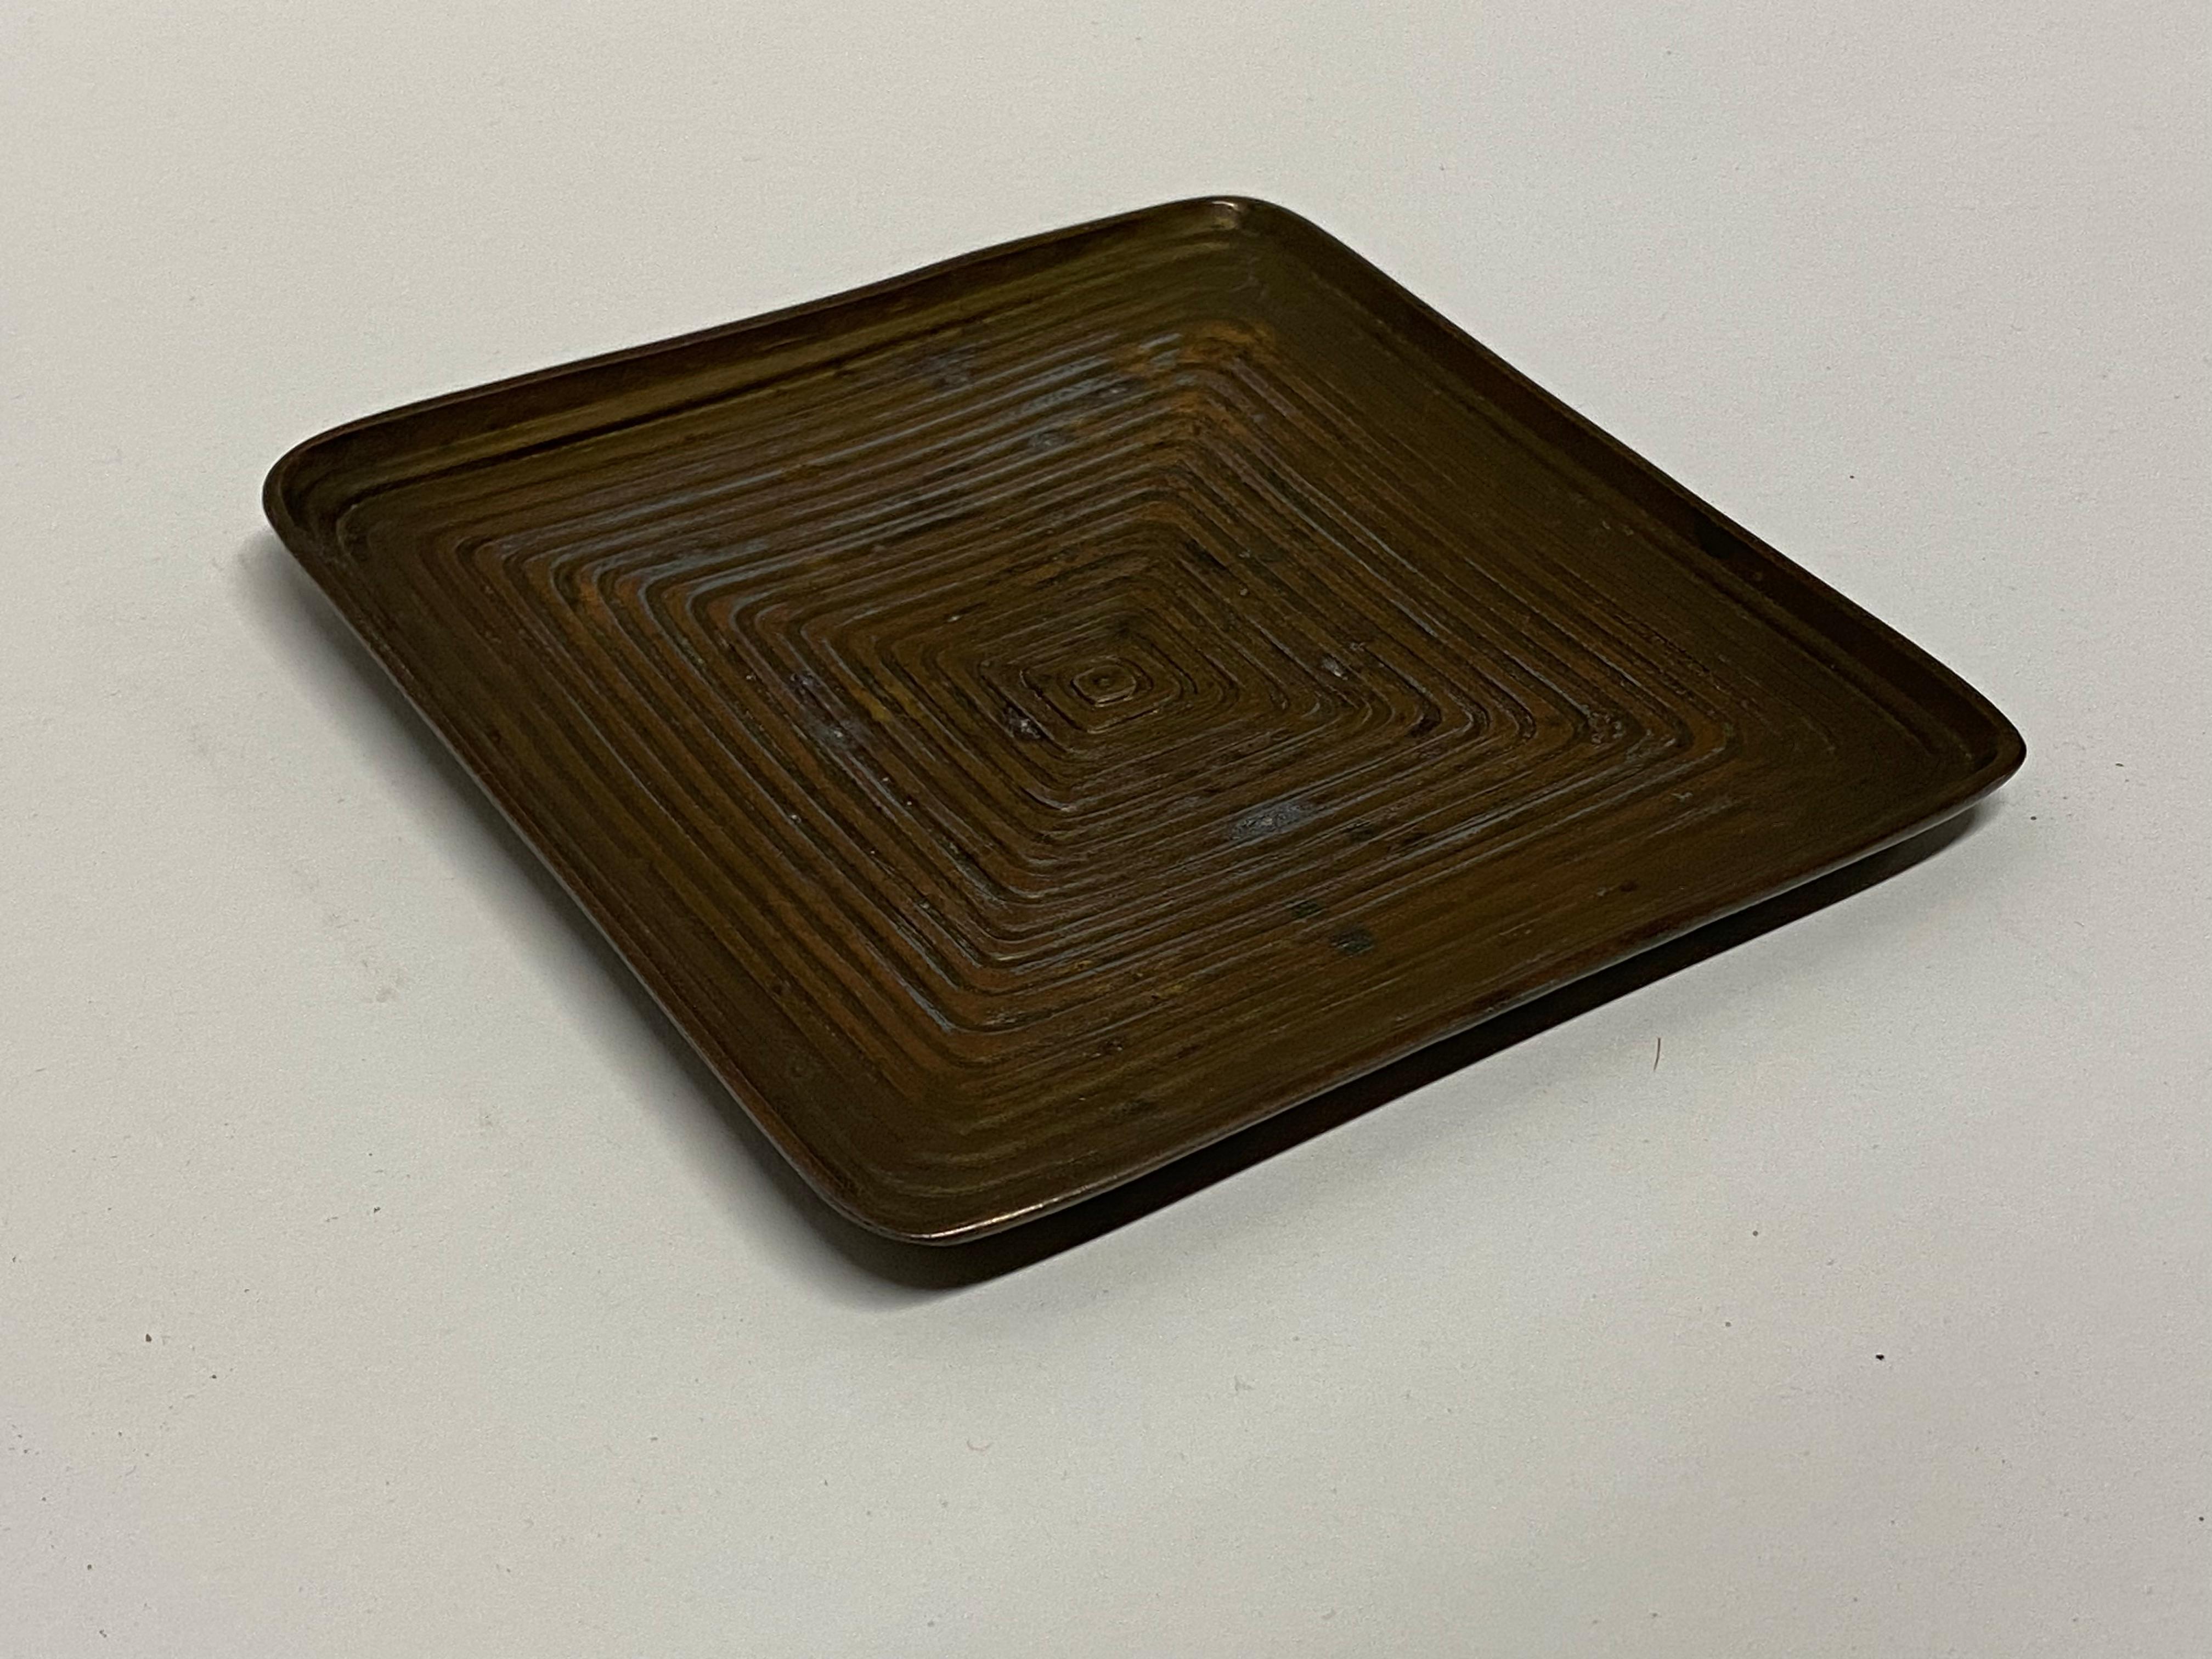 American Ben Seibel Jenfred Concentric Square Tray For Sale